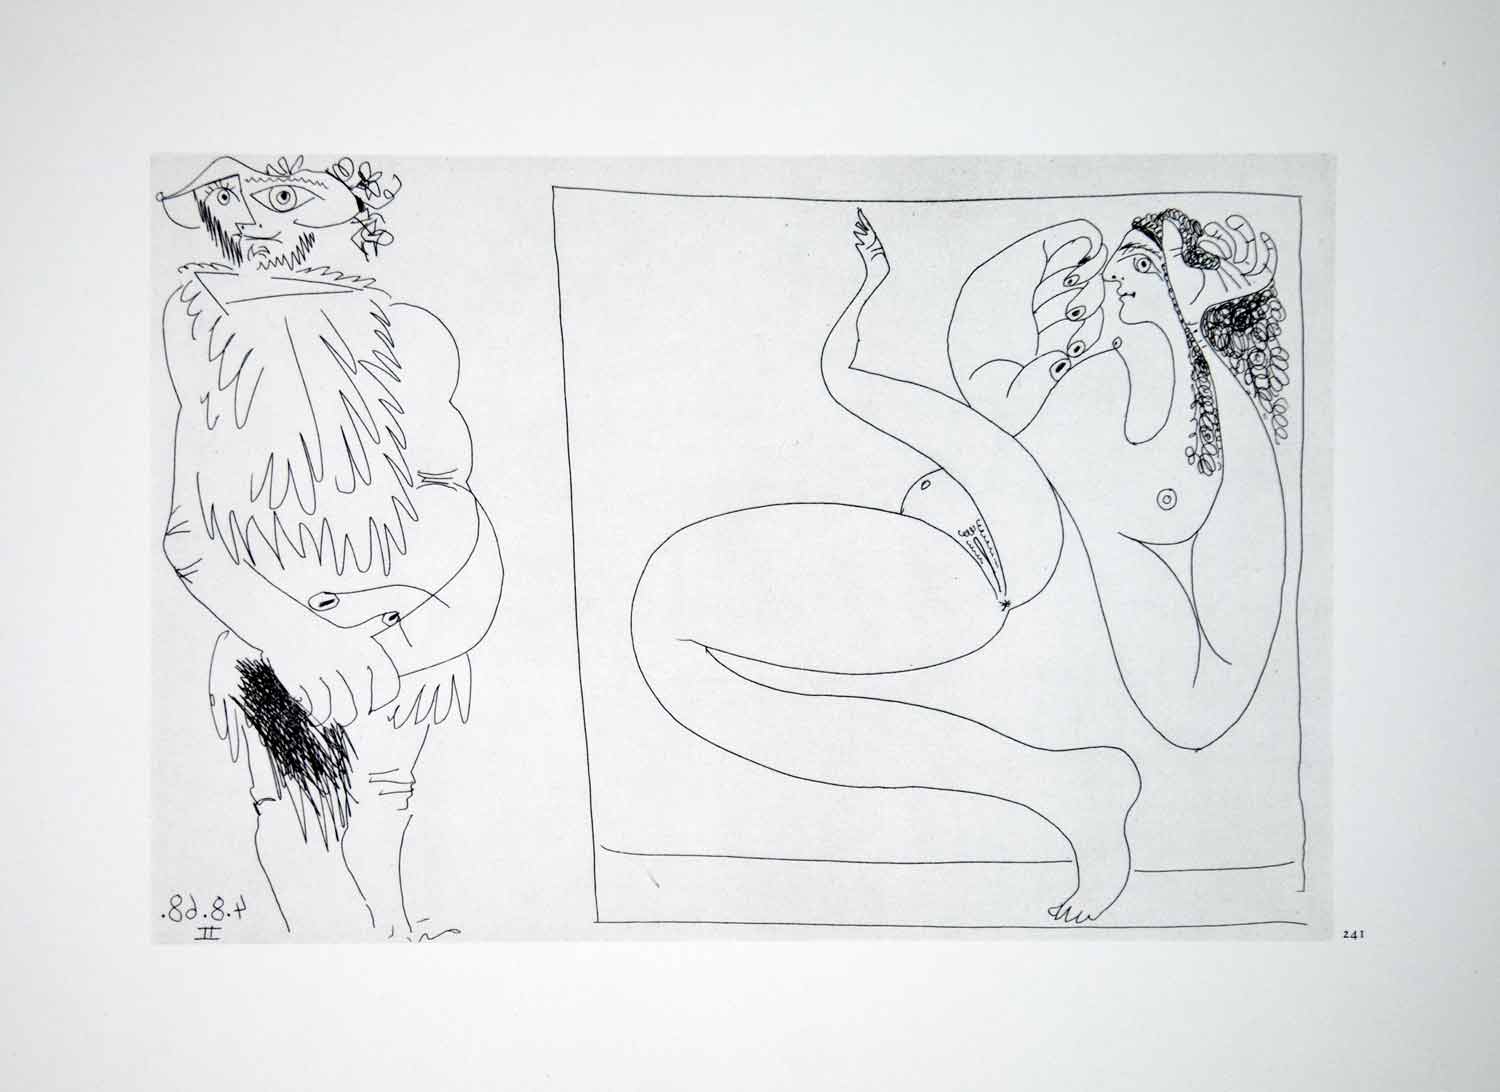 1970 Heliogravure Picasso Abstract Erotic Art Nudes Male Female Figures P347B